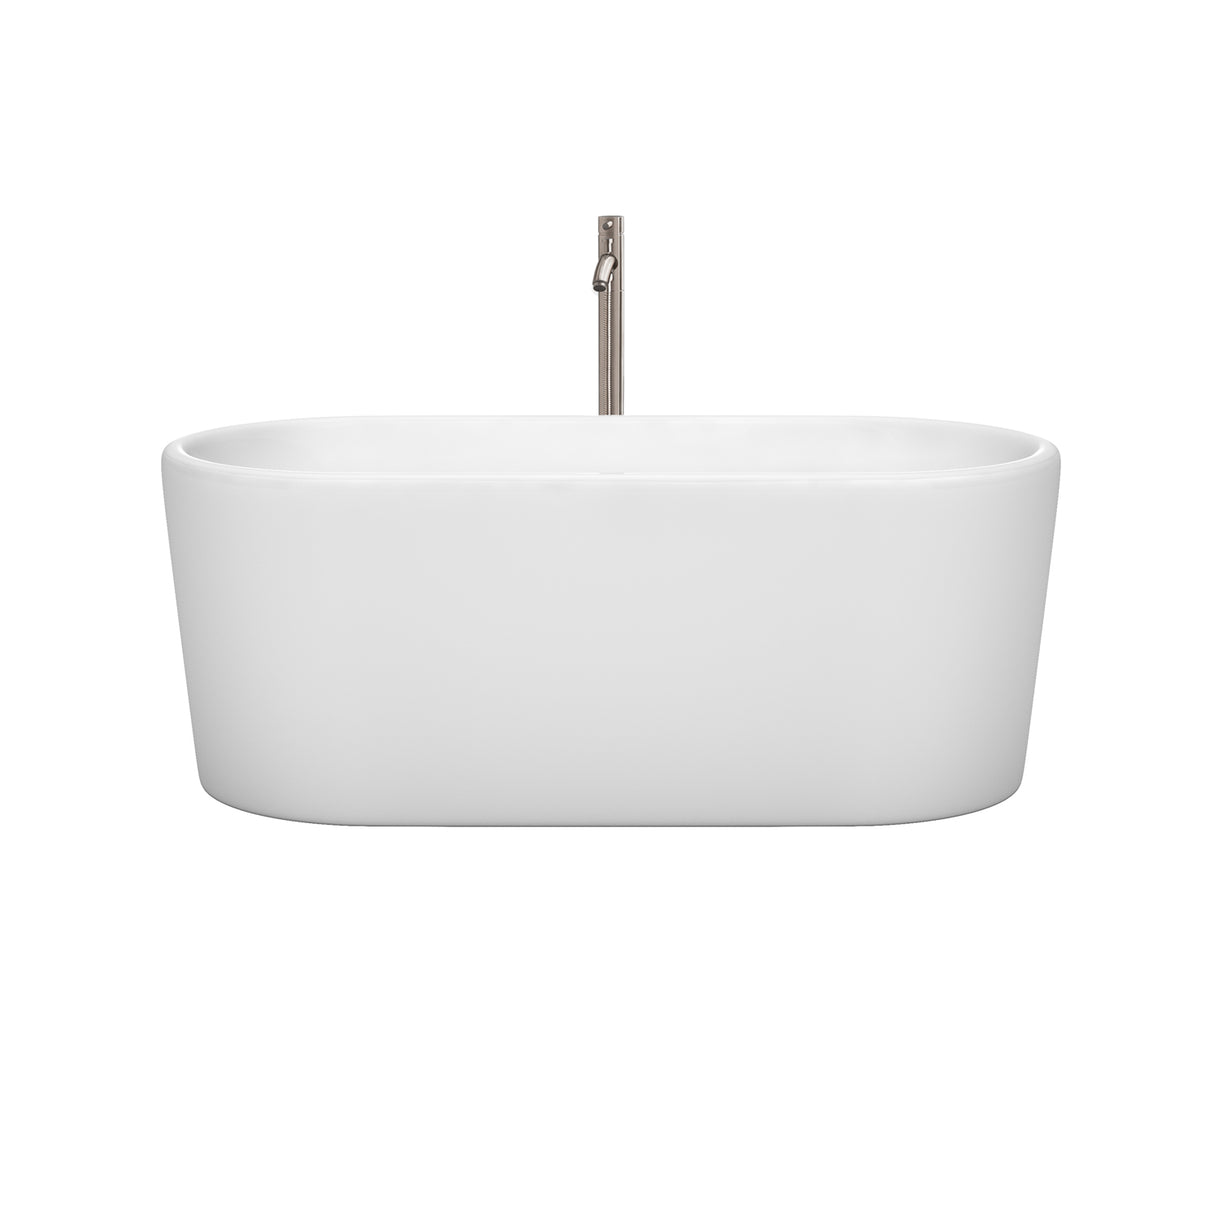 Ursula 59 Inch Freestanding Bathtub in White with Floor Mounted Faucet Drain and Overflow Trim in Brushed Nickel